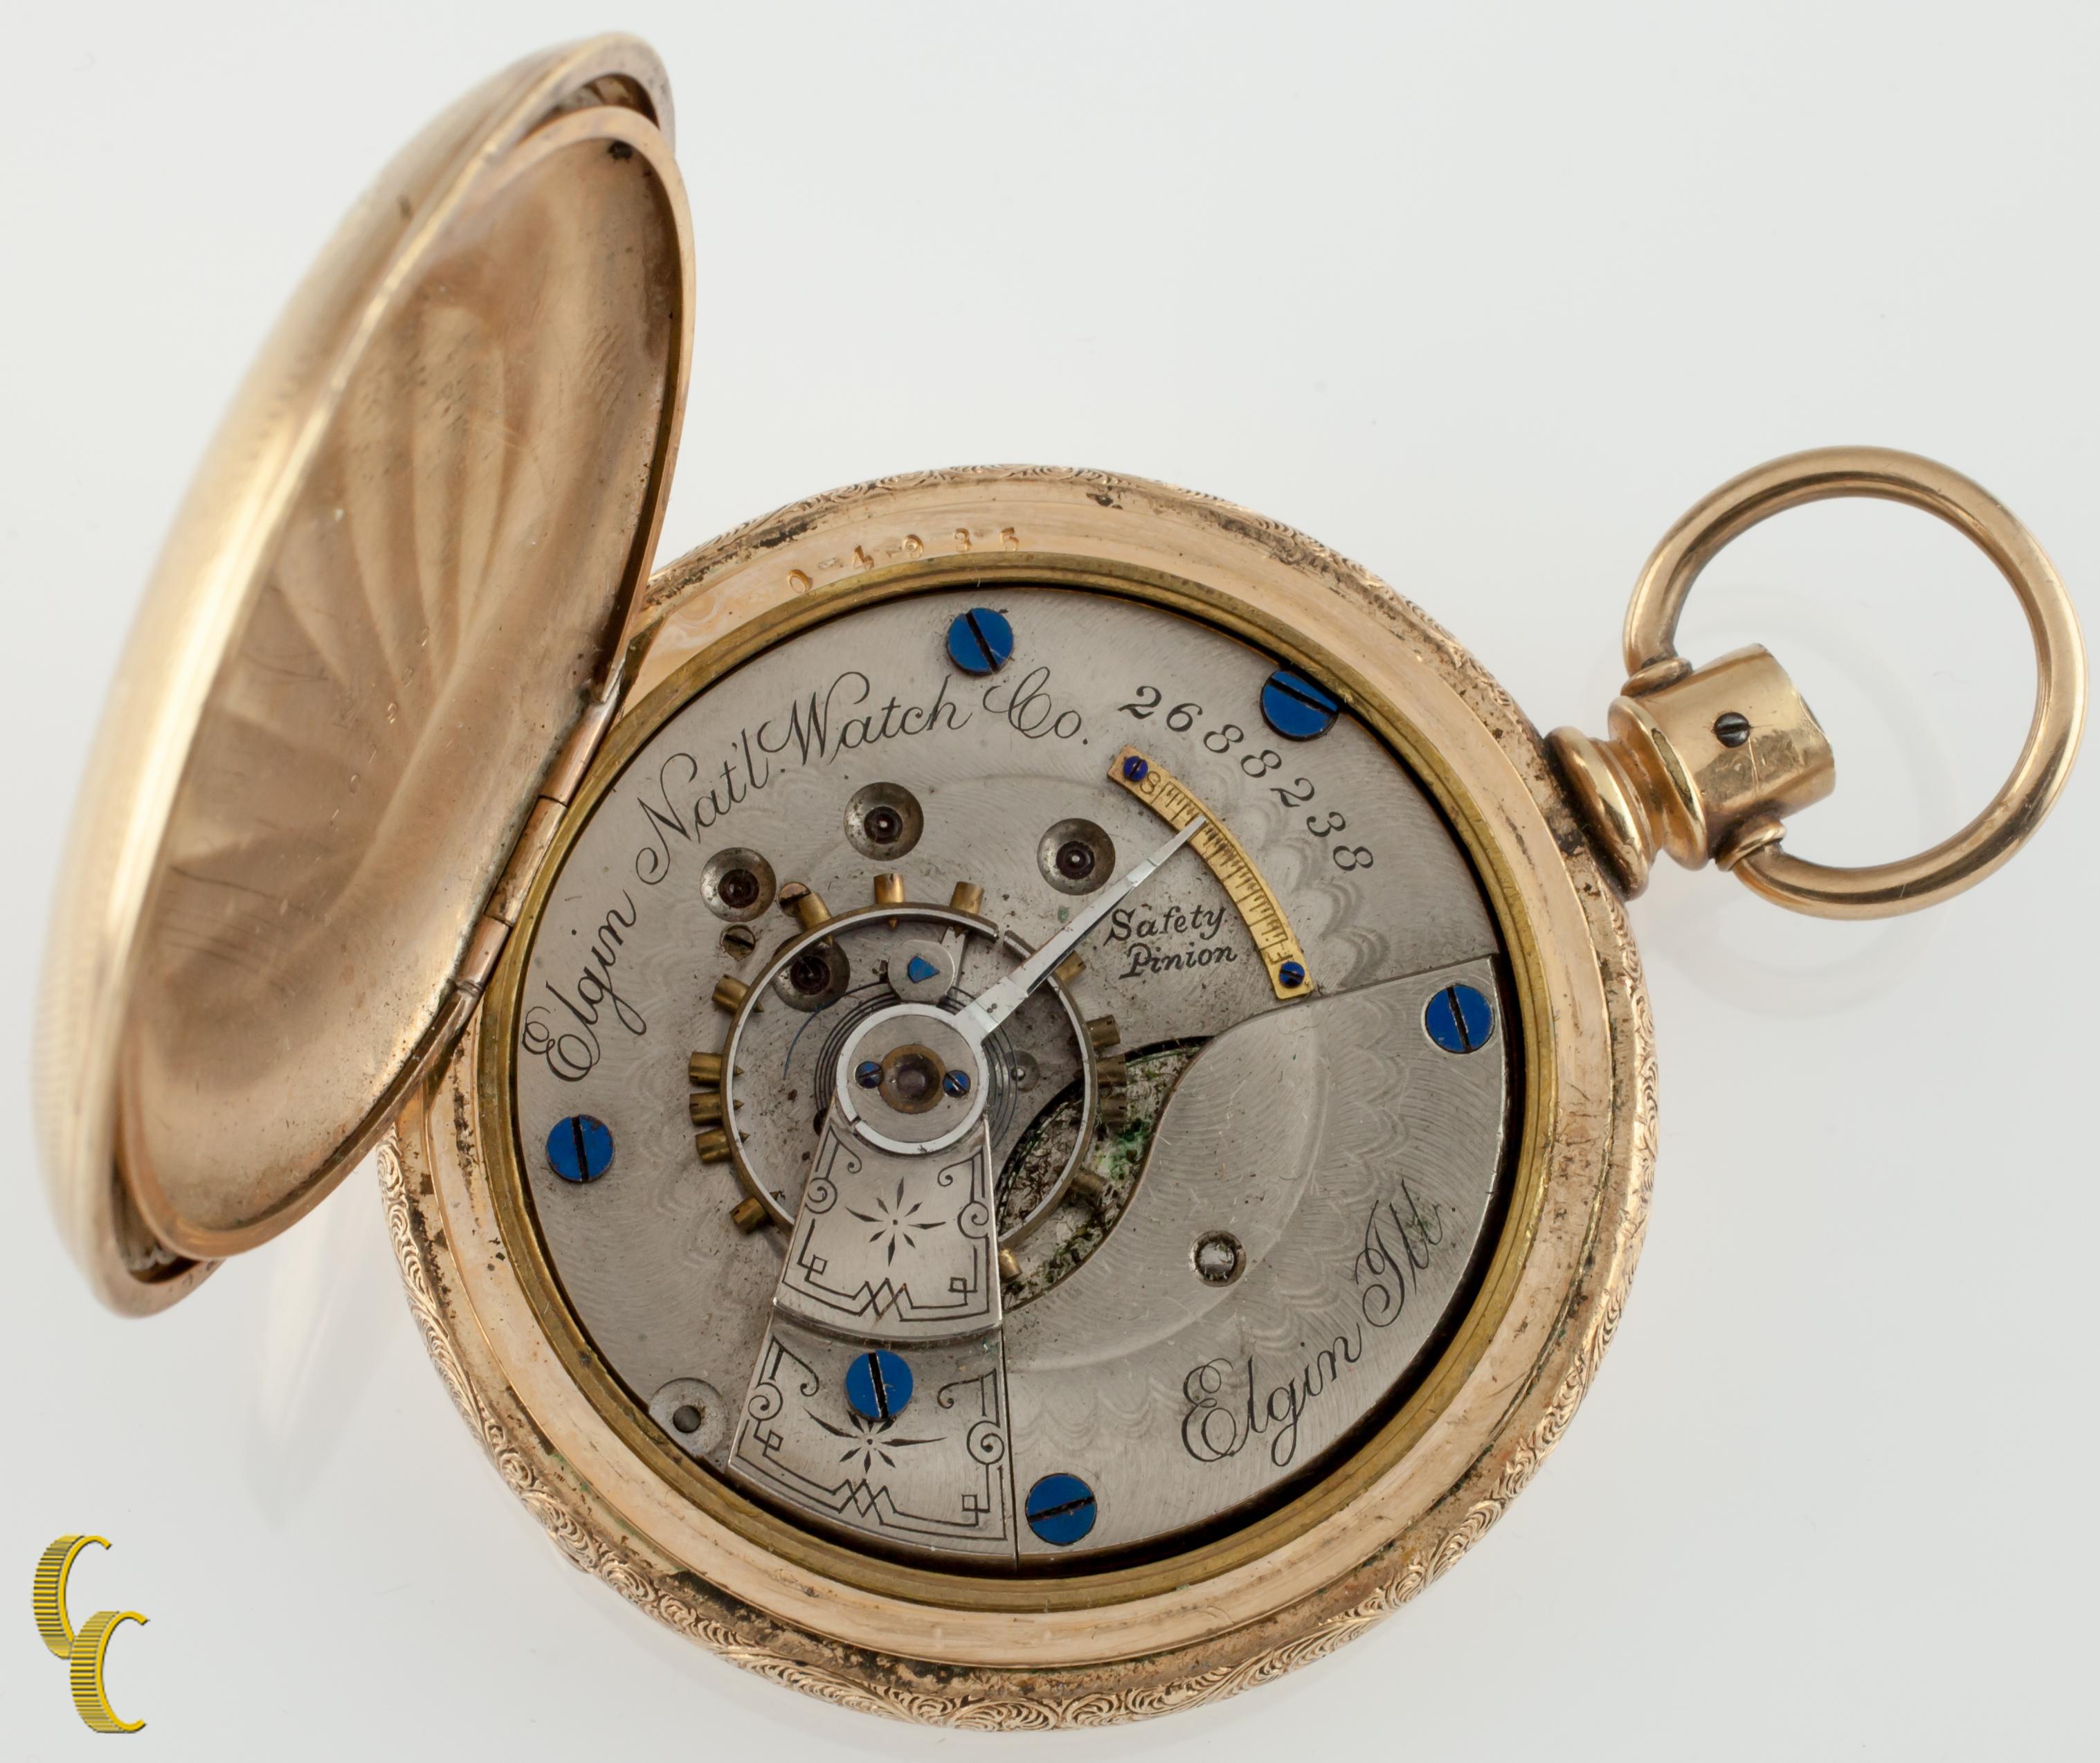 Beautiful Antique Elgin Pocket Watch w/ White Dial Including Cobalt Blue Hands & Dedicated Second Dial
Gold Filled Case w/ Intricate Hand-Etched Pastoral Design on Front and Reverse, Guilloche on Border
Black Roman Numerals
Case Serial